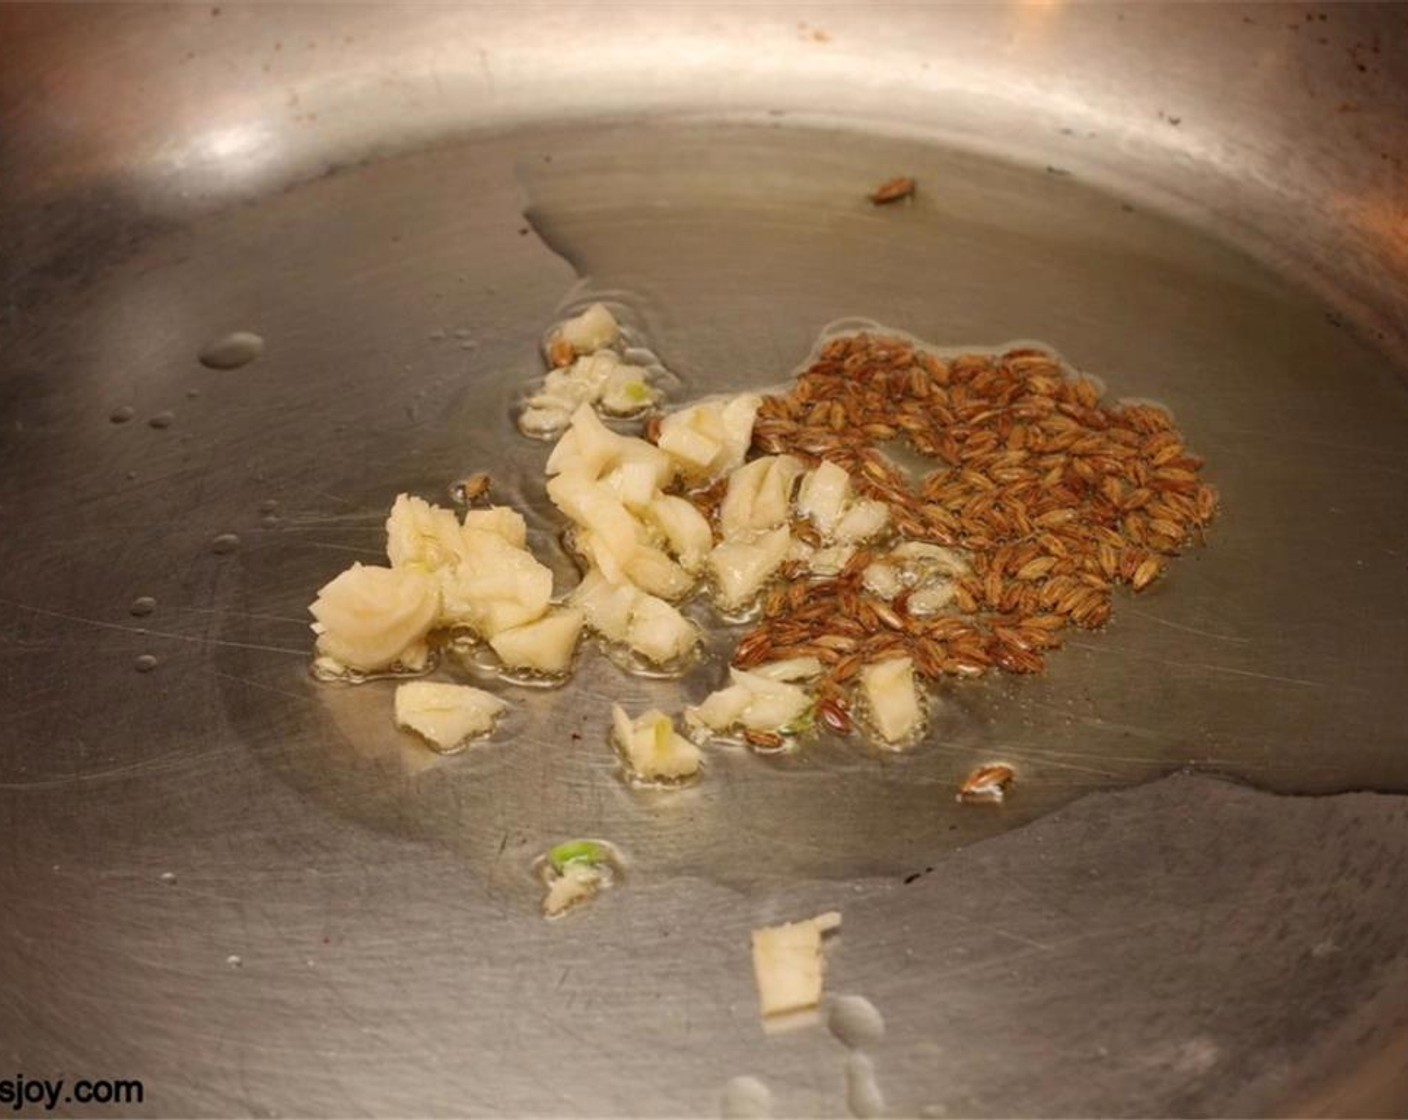 step 2 Heat Olive Oil (1 tsp). Add Cumin Seeds (1 tsp) and Garlic (2 cloves) and sauté for a few seconds.